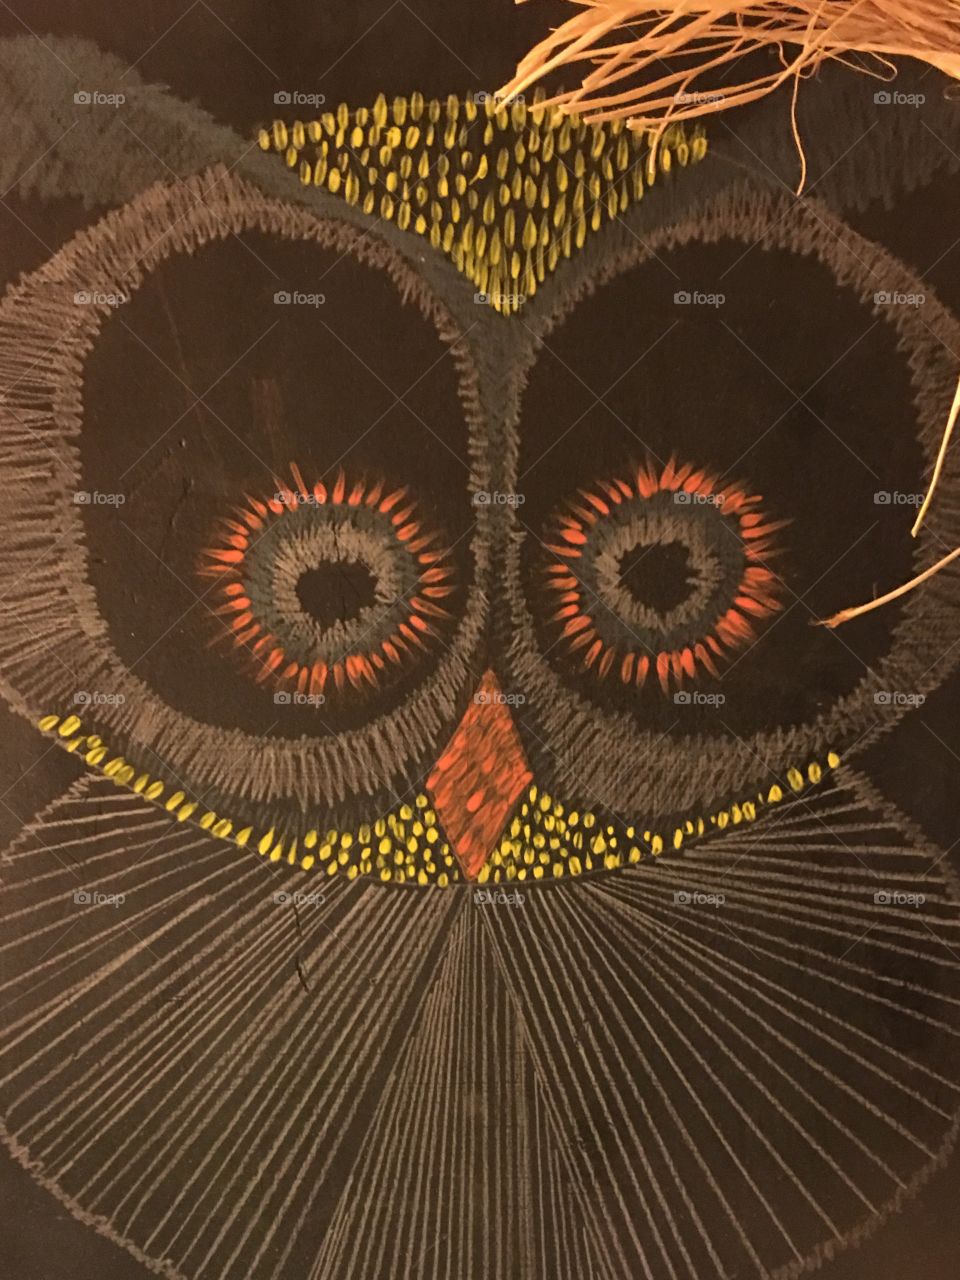 Painting of a owl 